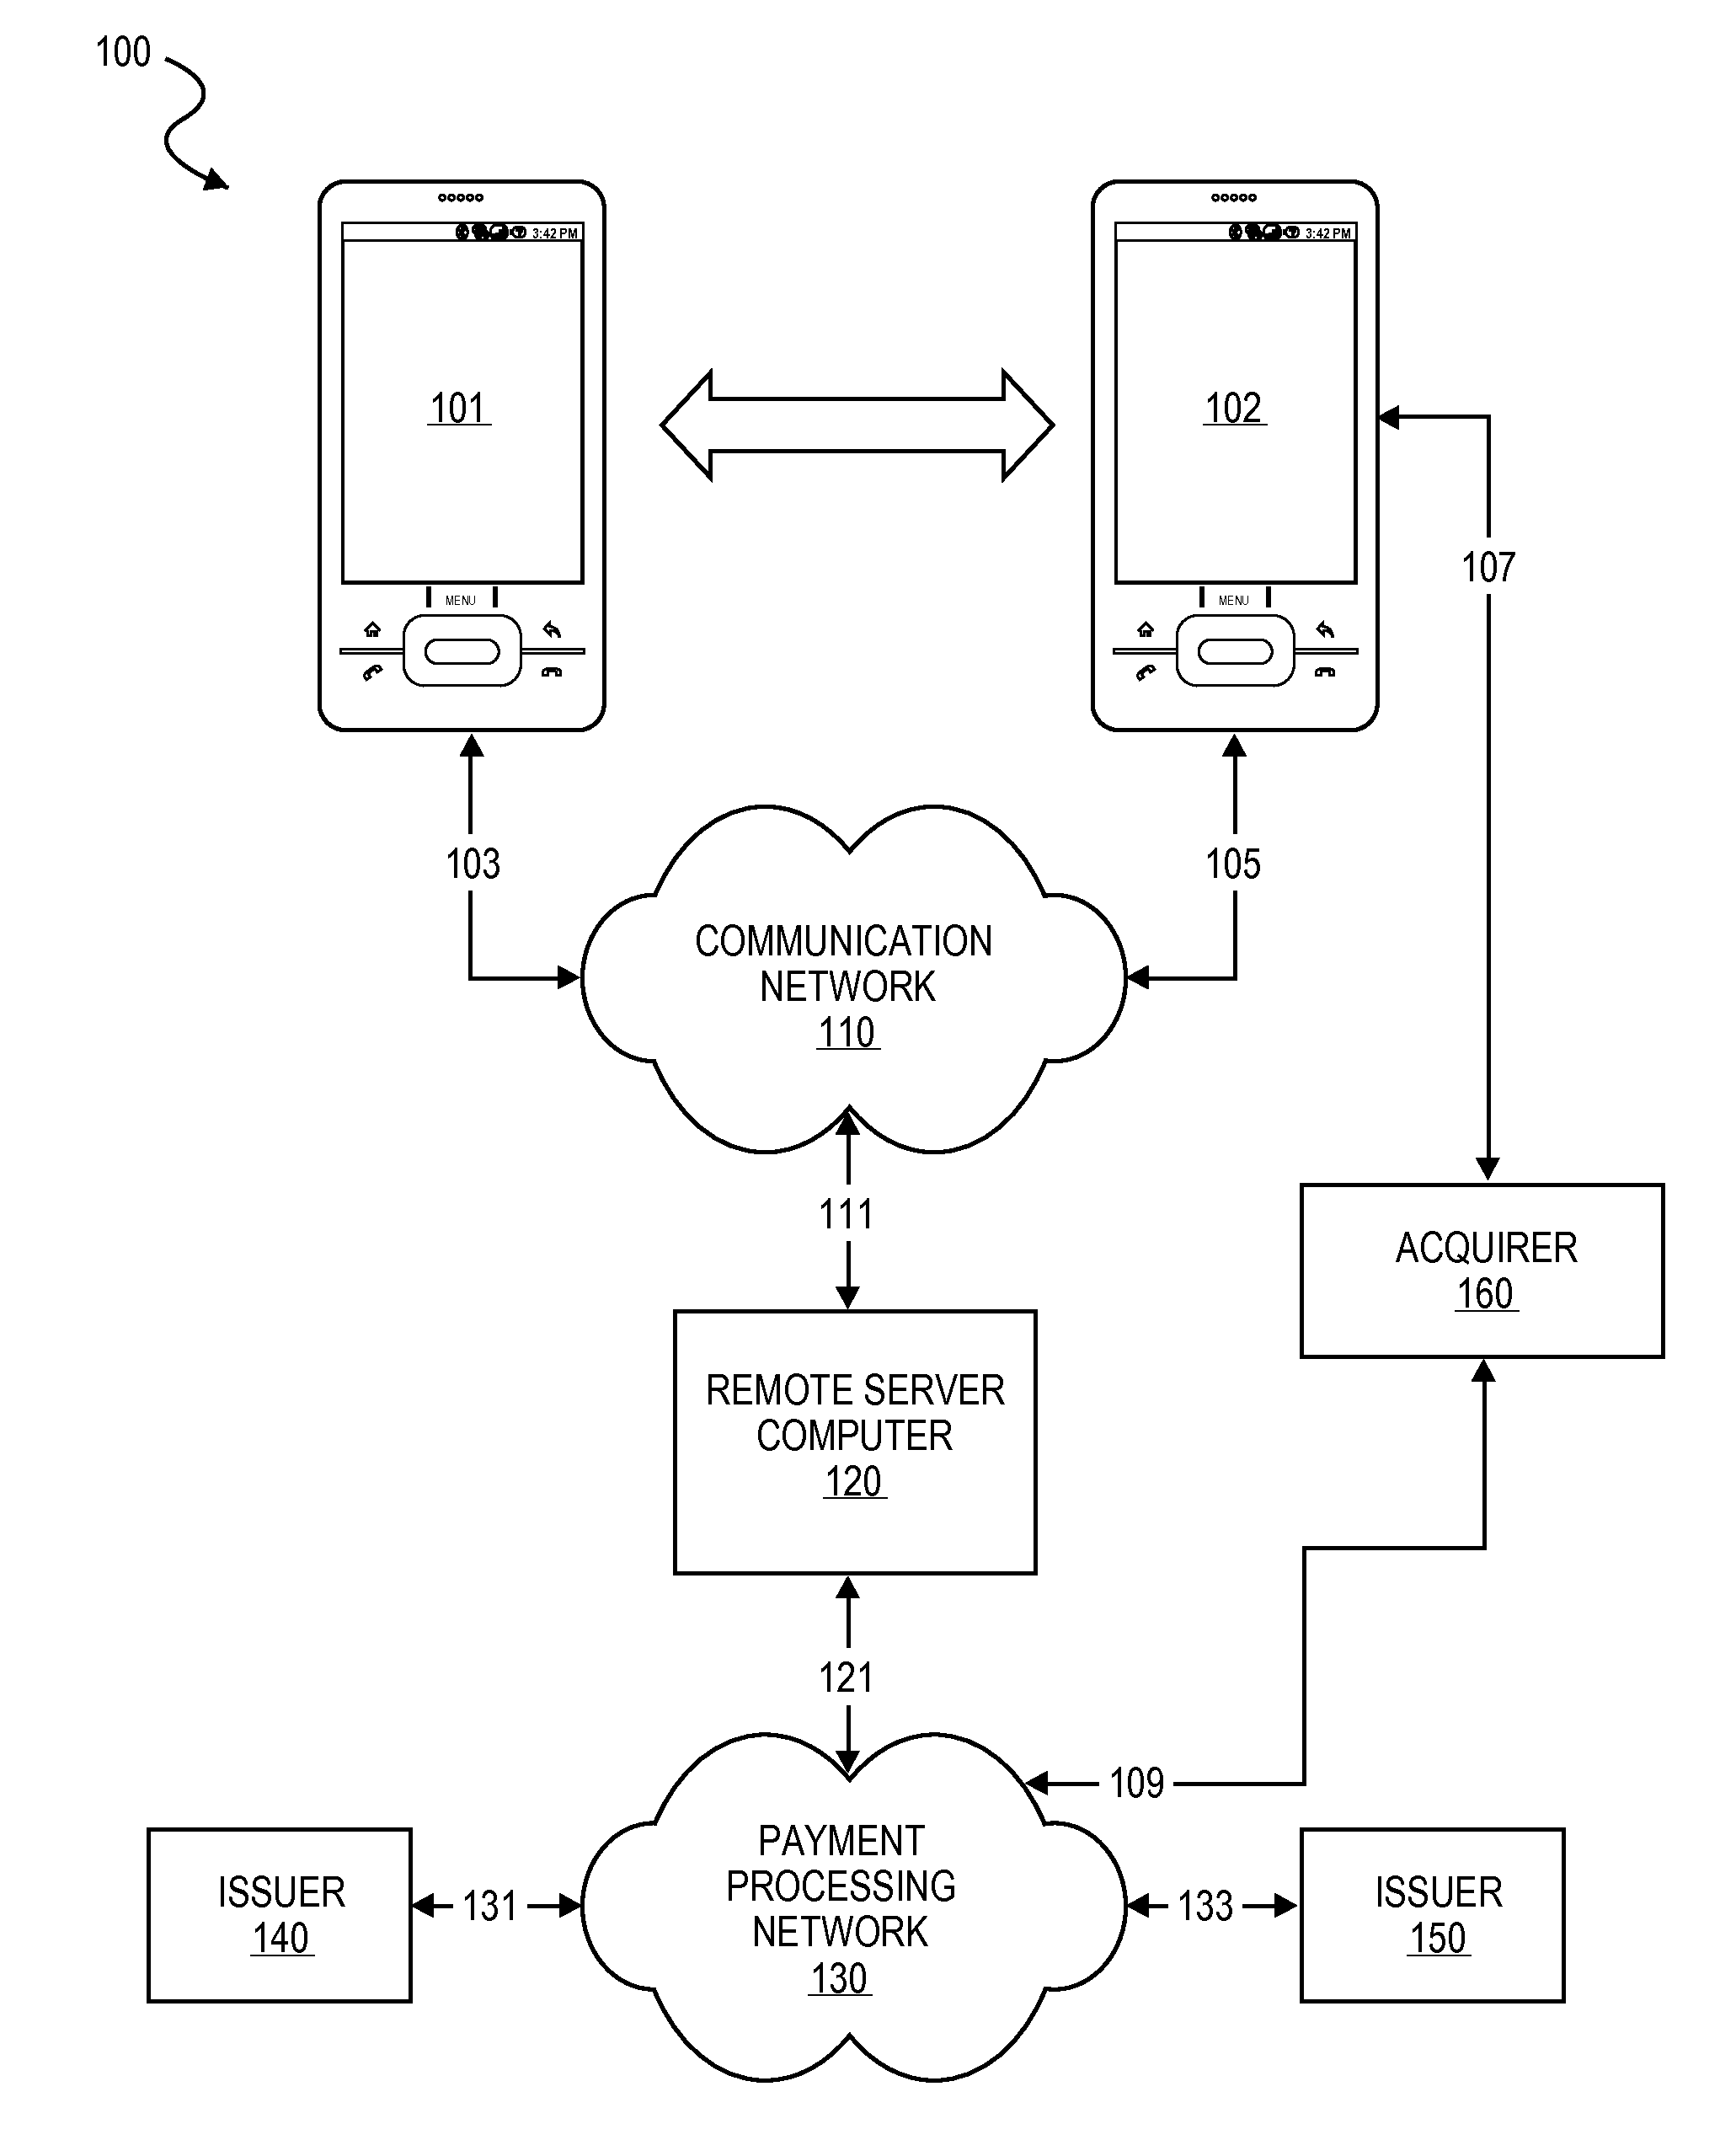 Transaction Using A Mobile Device With An Accelerometer